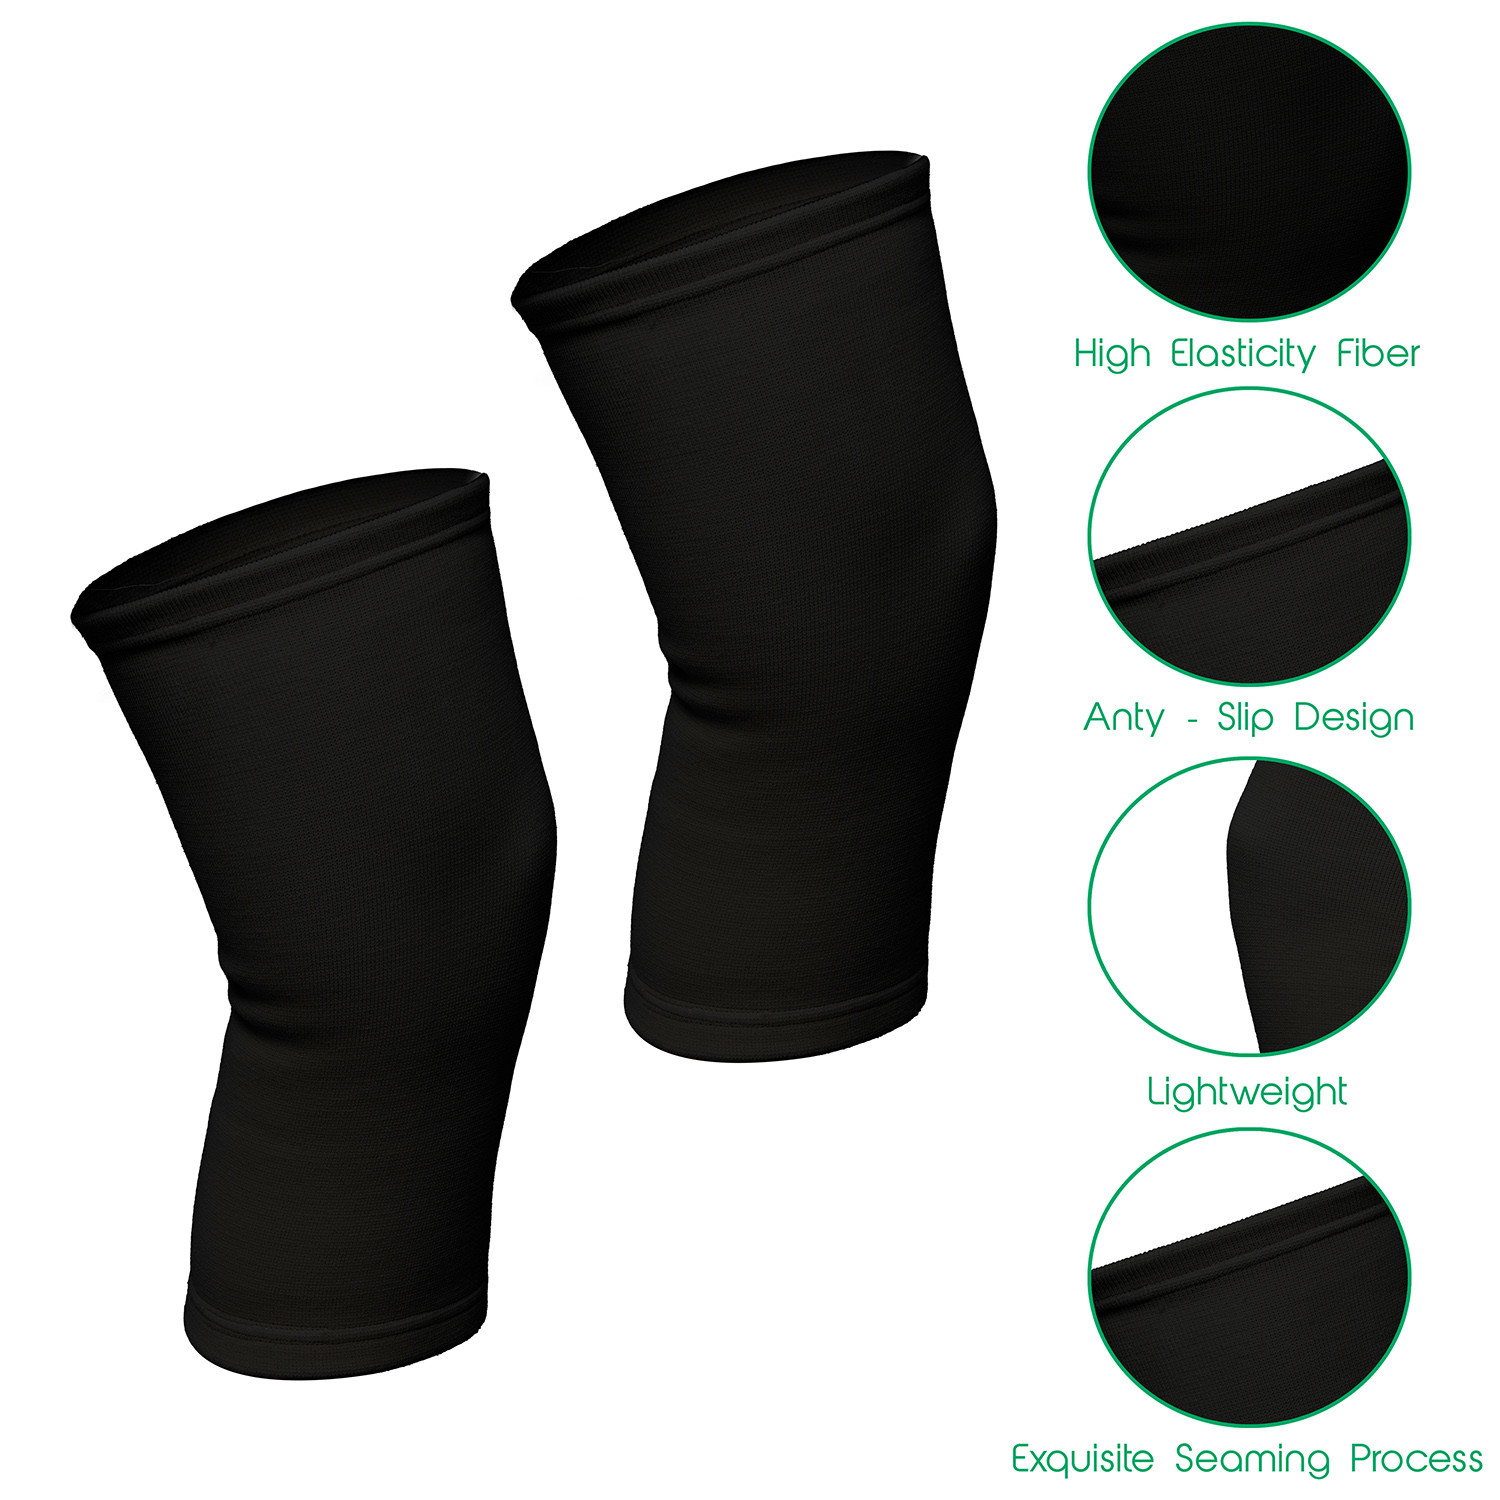 Kuber Industries Knee Cap | Cotton 4 Way Compression Knee Sleeves |Sleeves For Joint Pain | Sleeves For Arthritis Relief | Unisex Knee Wraps | Knee Bands |Size-M|1 Pair|Black